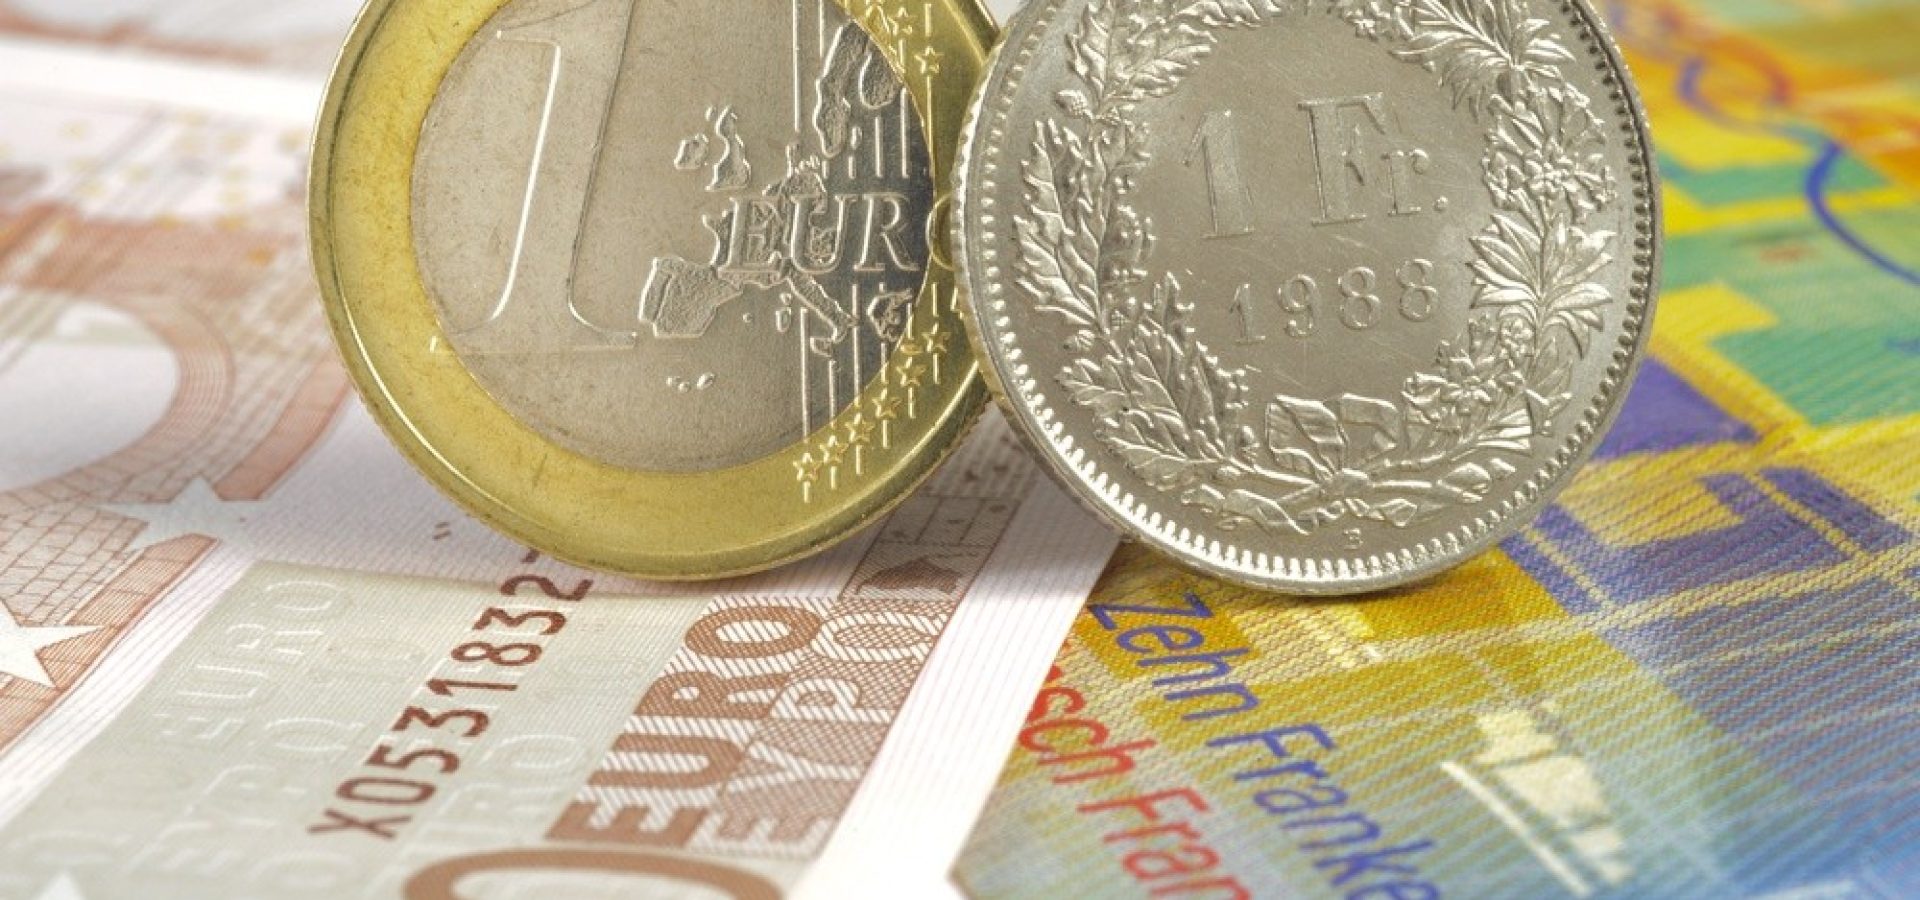 Wibest – Franc: Euro and Swiss franc (chf) coins and bills.